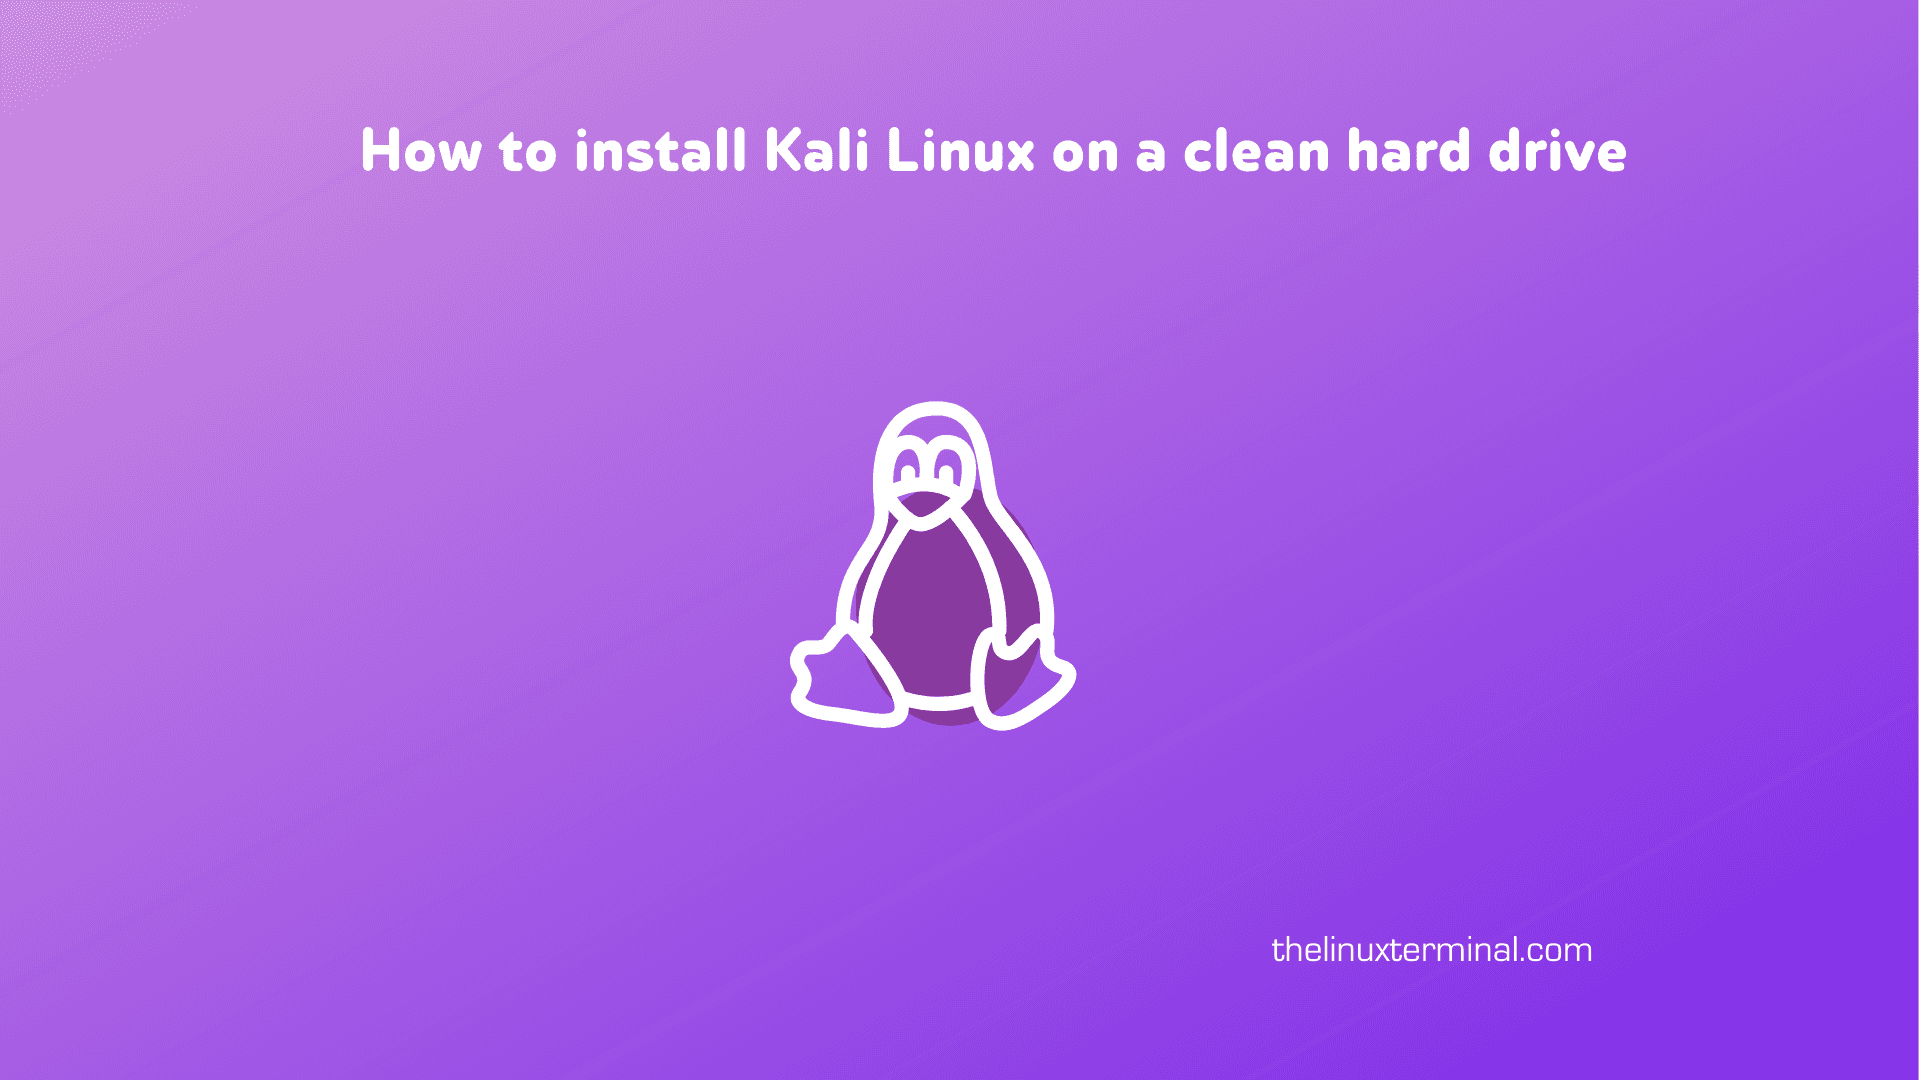 How to install Kali Linux on a clean hard drive